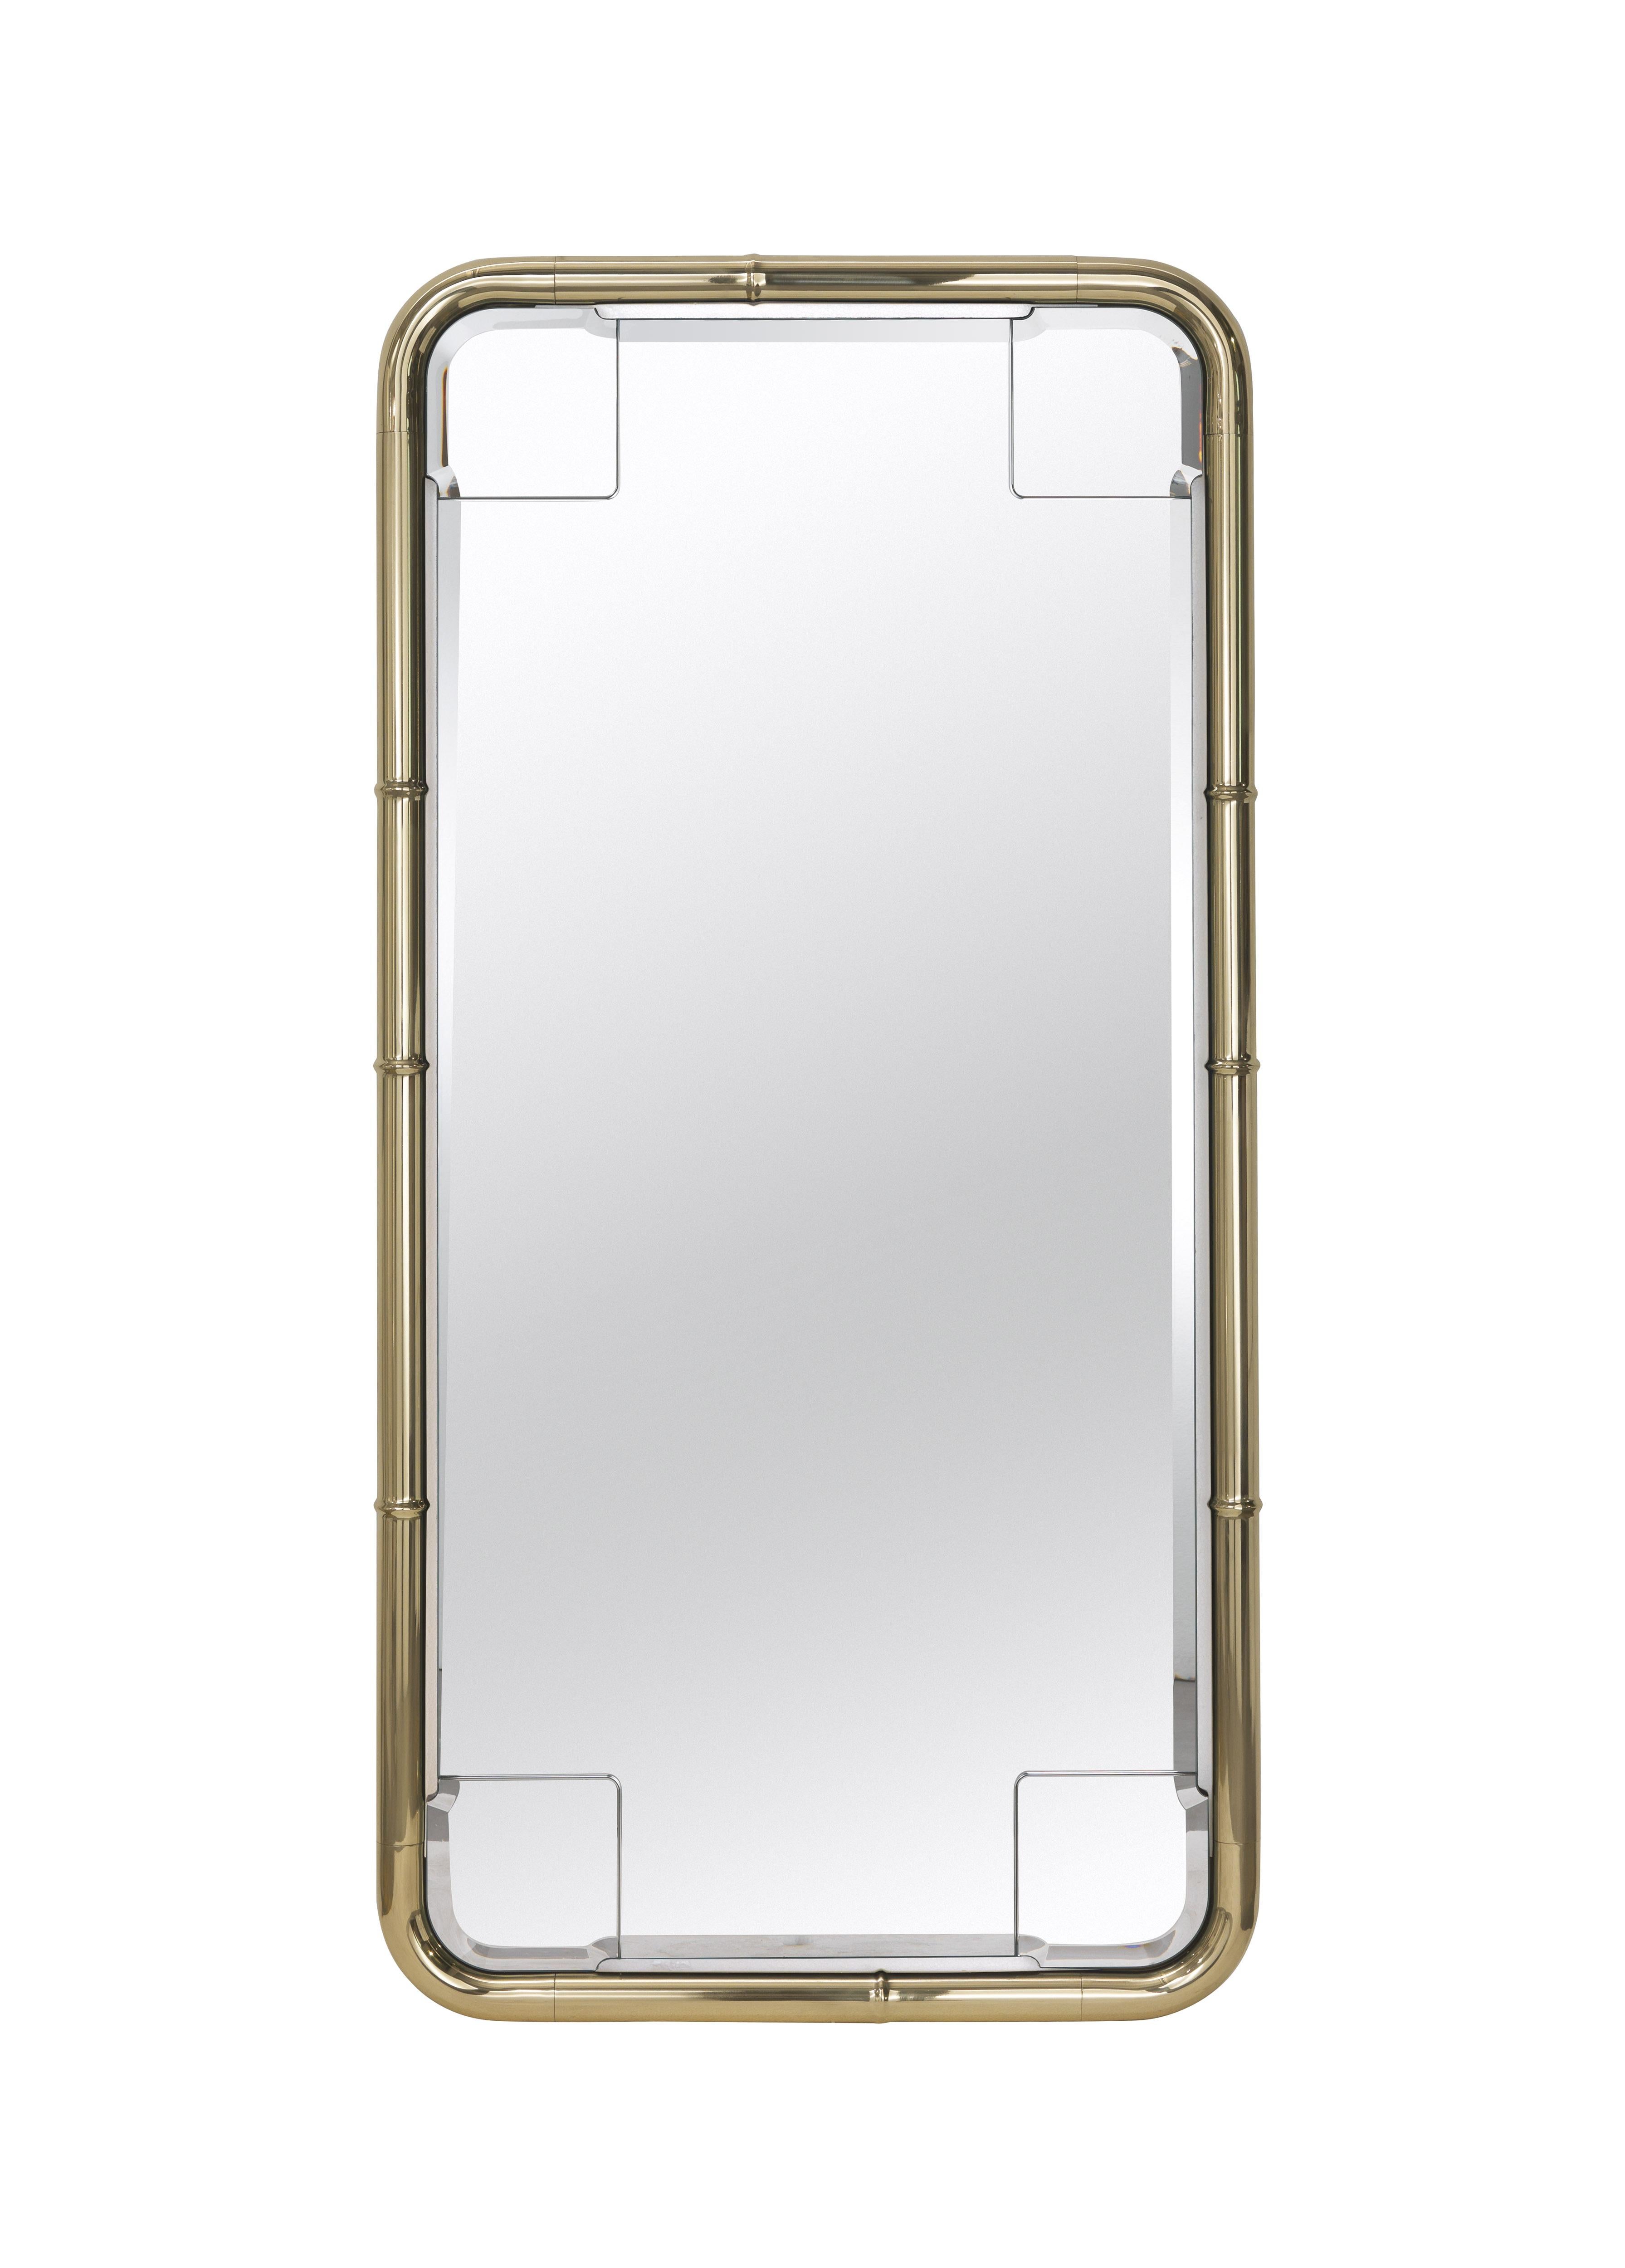 21st Century Delfi Mirror in Polished Brass by Etro Home Interiors